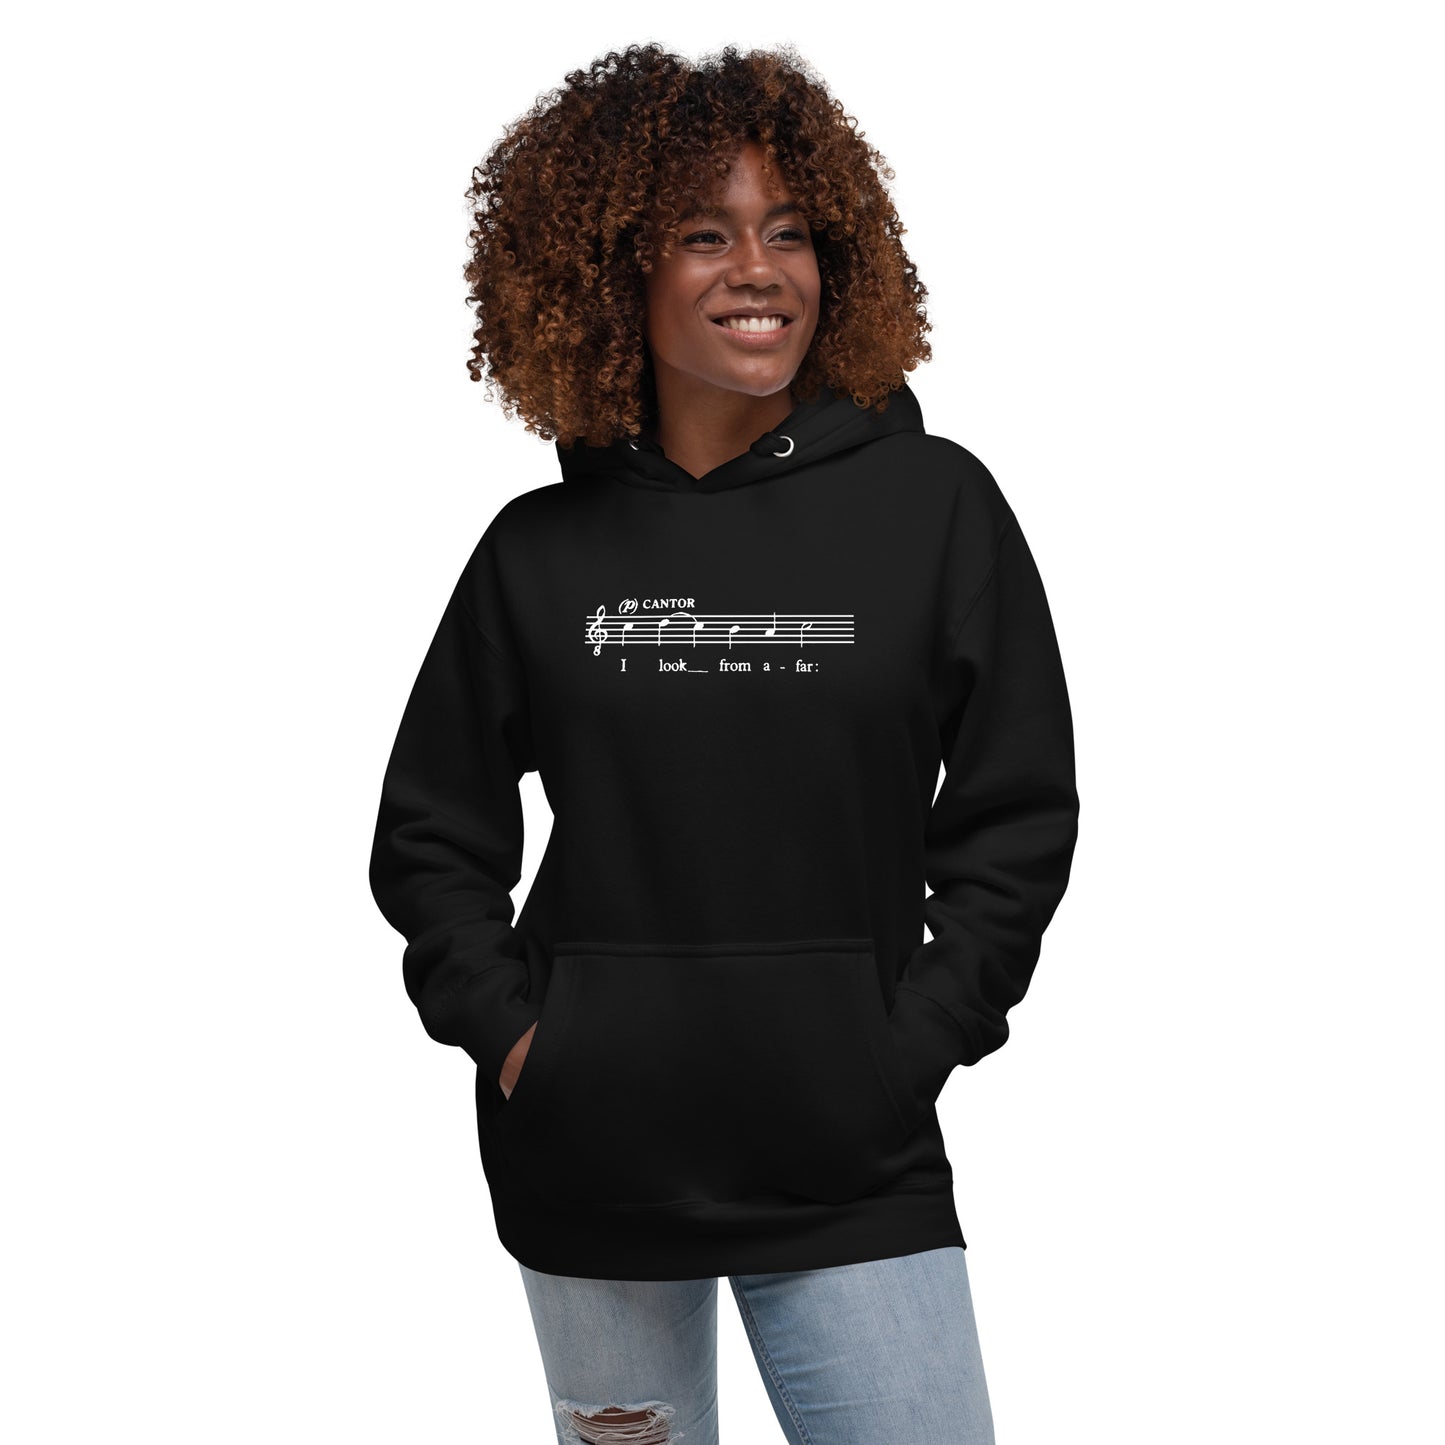 I look from afar - Advent Unisex Hoodie